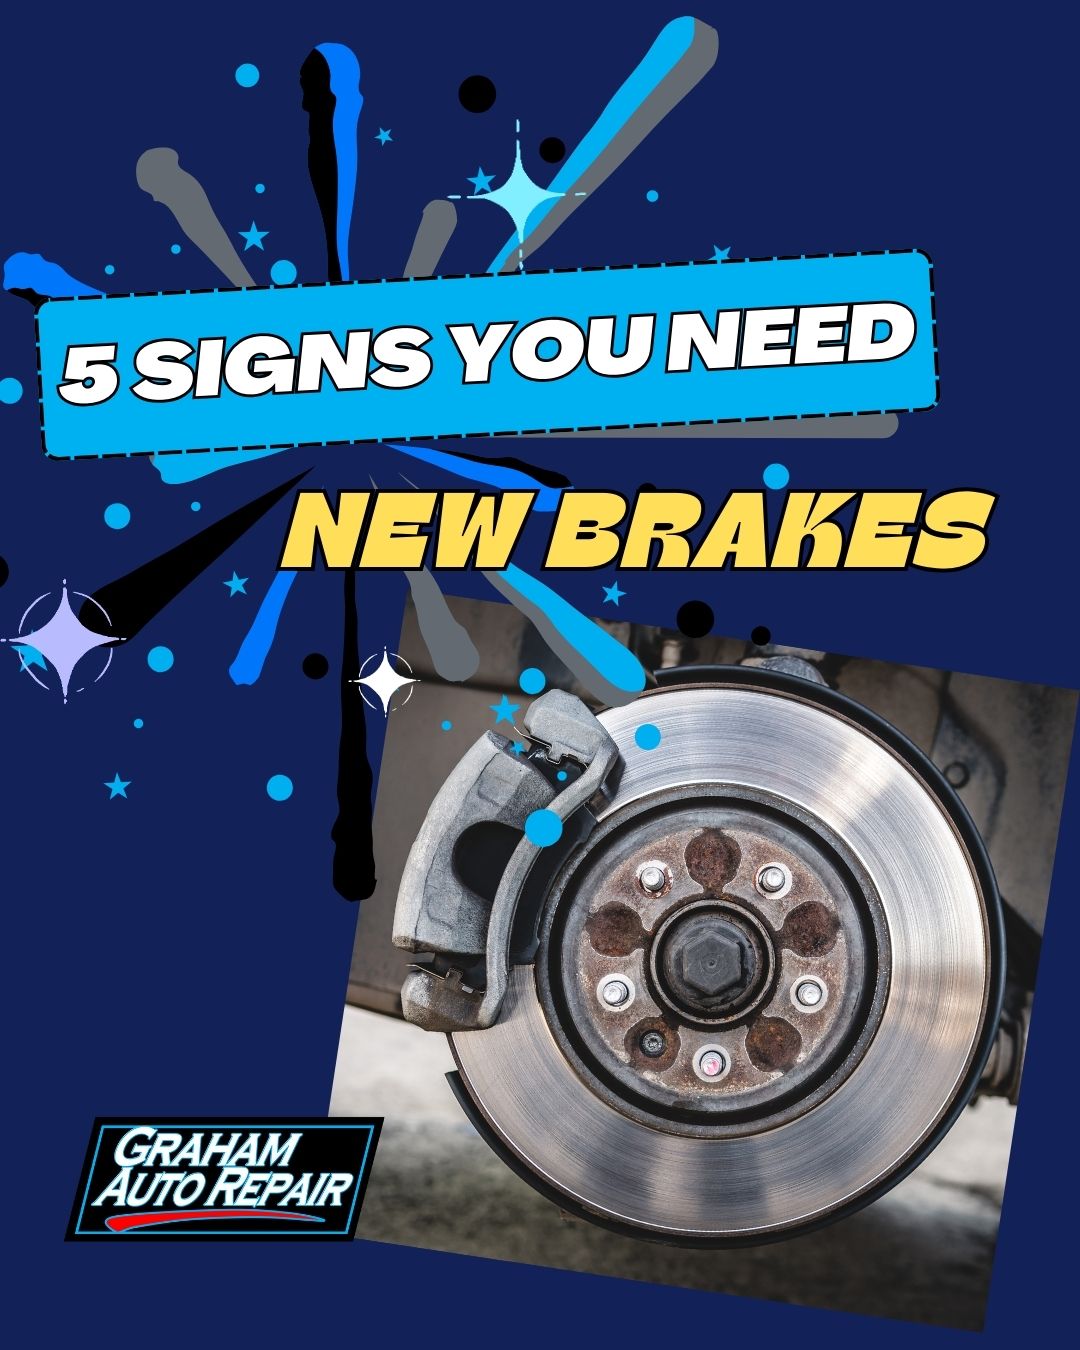 What Are The Signs You Need New Brakes?